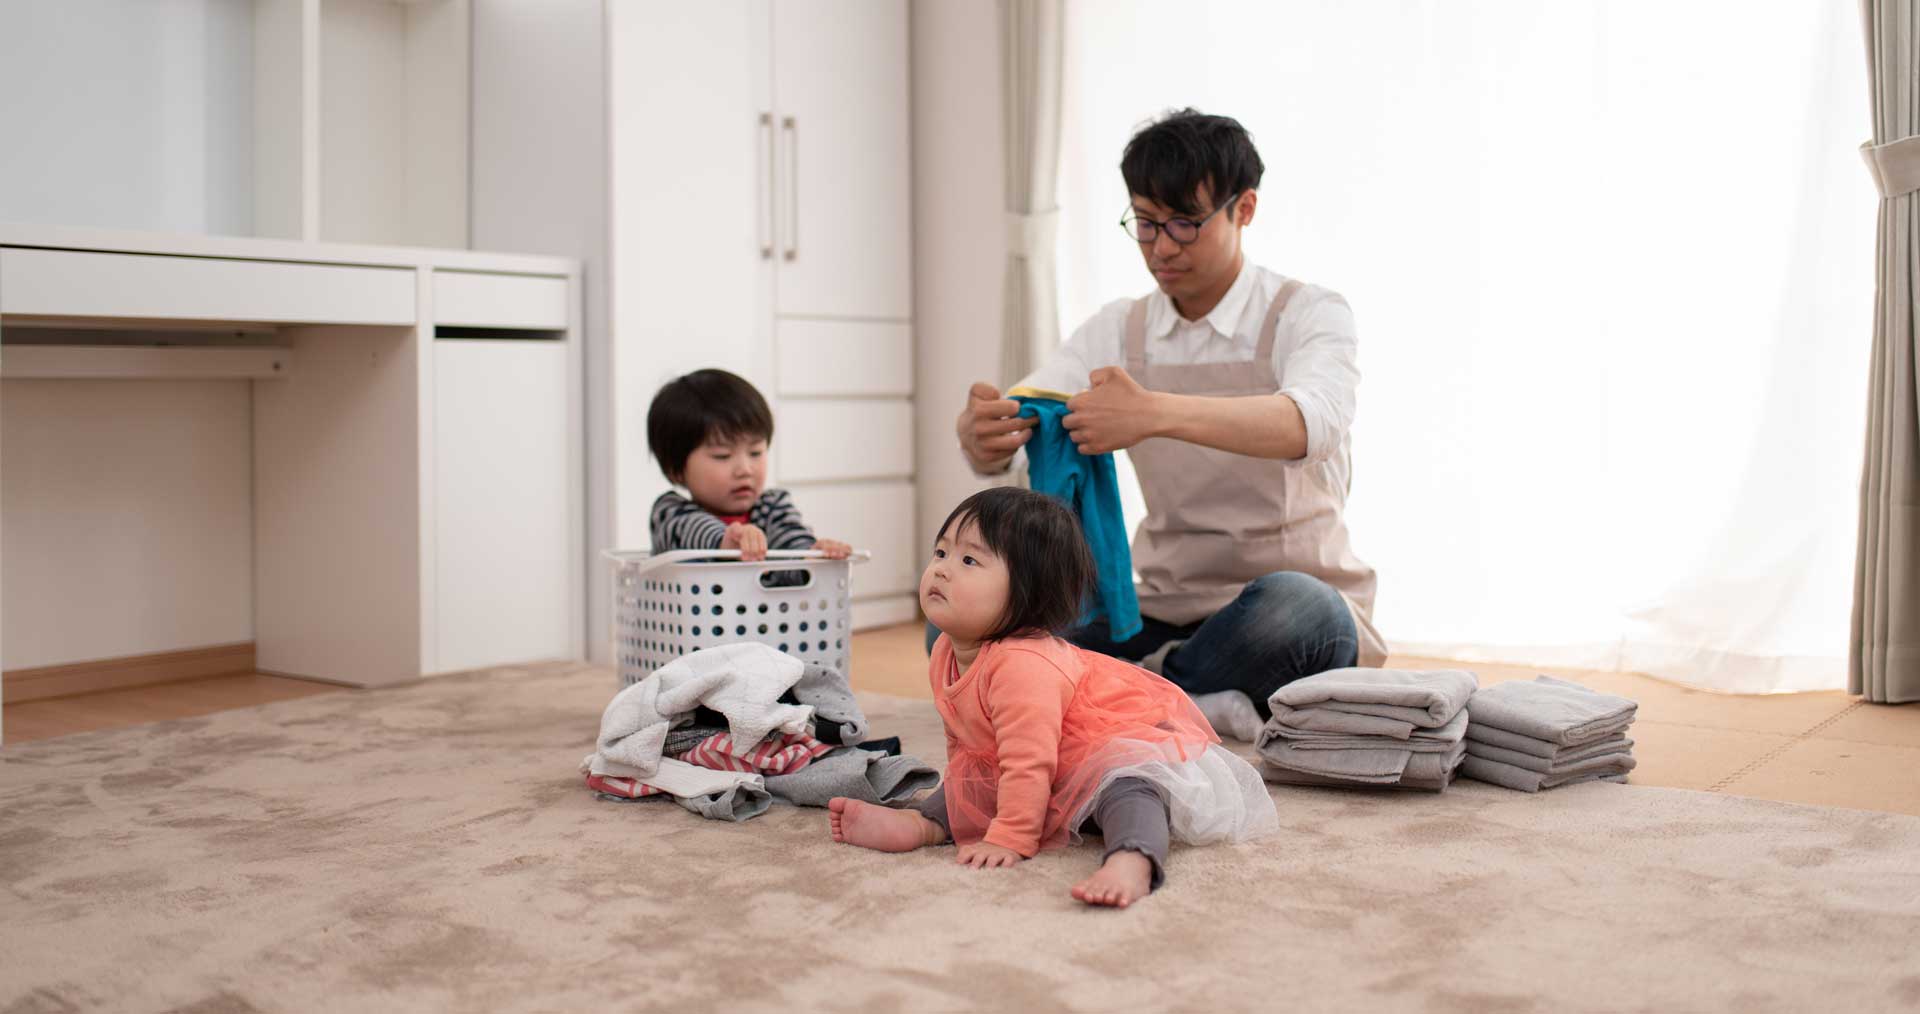 A father folds laundry as his two young children play and watch